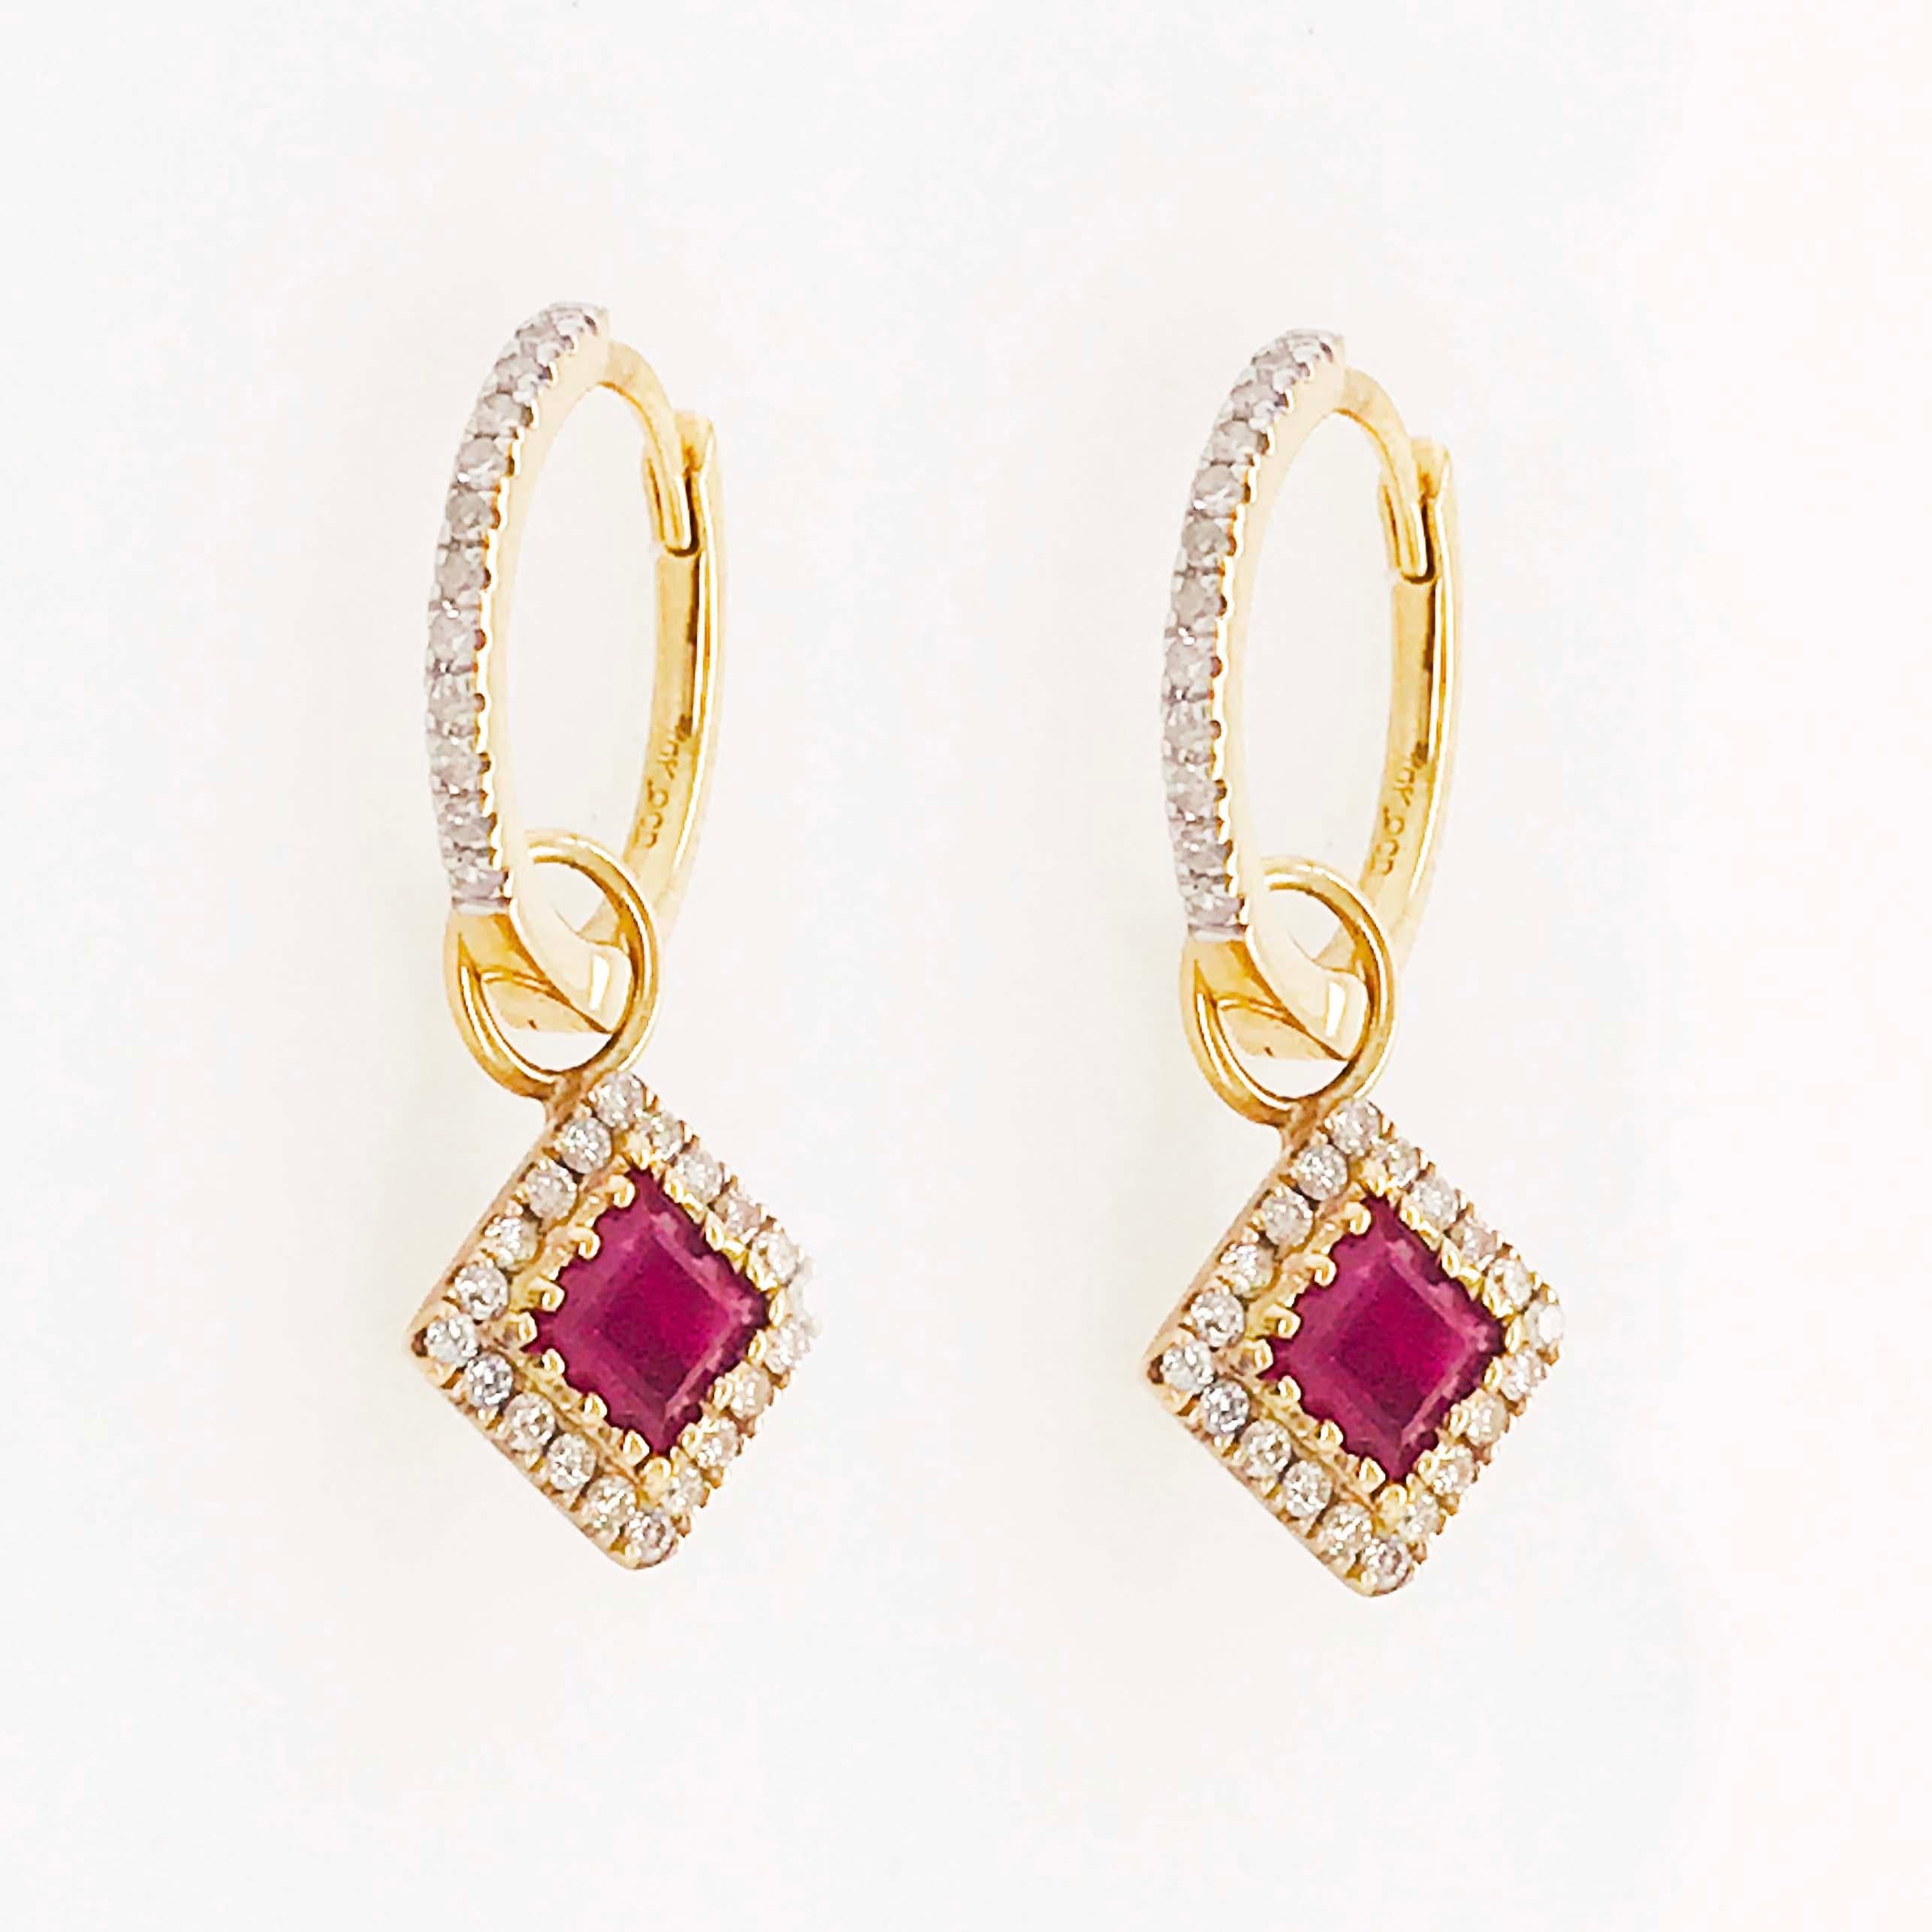 These genuine ruby and diamond earring huggies and charms are trendy and stunning! With a square, or princess cut, genuine ruby gemstone set in each earring charm. The ruby gemstone is framed with a diamond halo that sparkles and compliments the